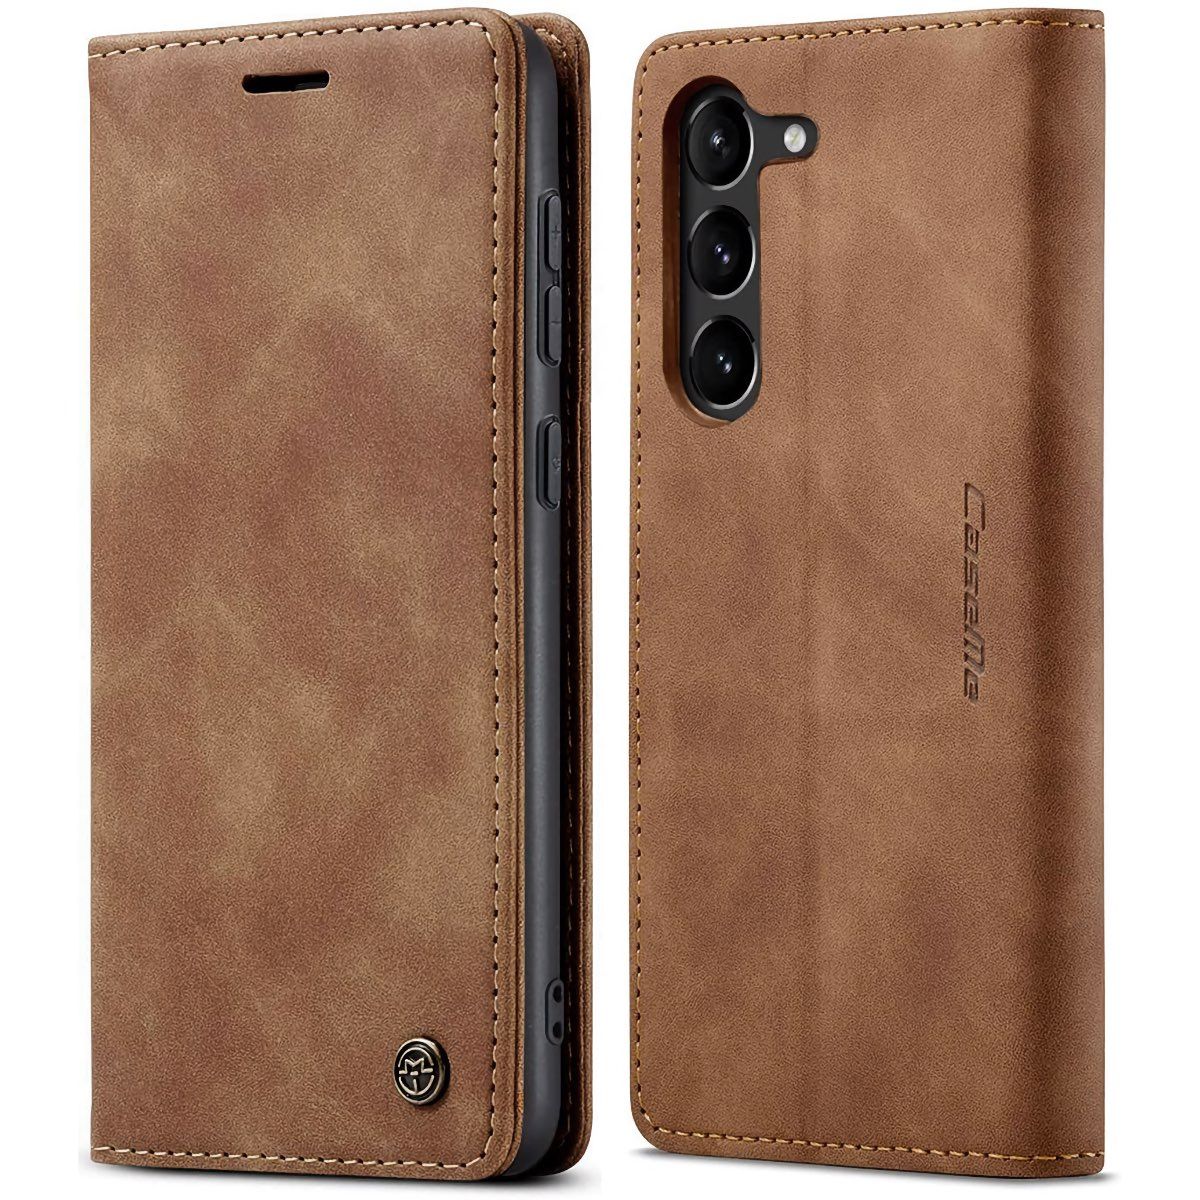 LXURY Wallet Case for Samsung Galaxy S23 Ultra/S23 Plus/S23, Durable Soft  Leather Case with Shoulder Strap Wrist Strap Flip Card Slot Cover,Brown,S23